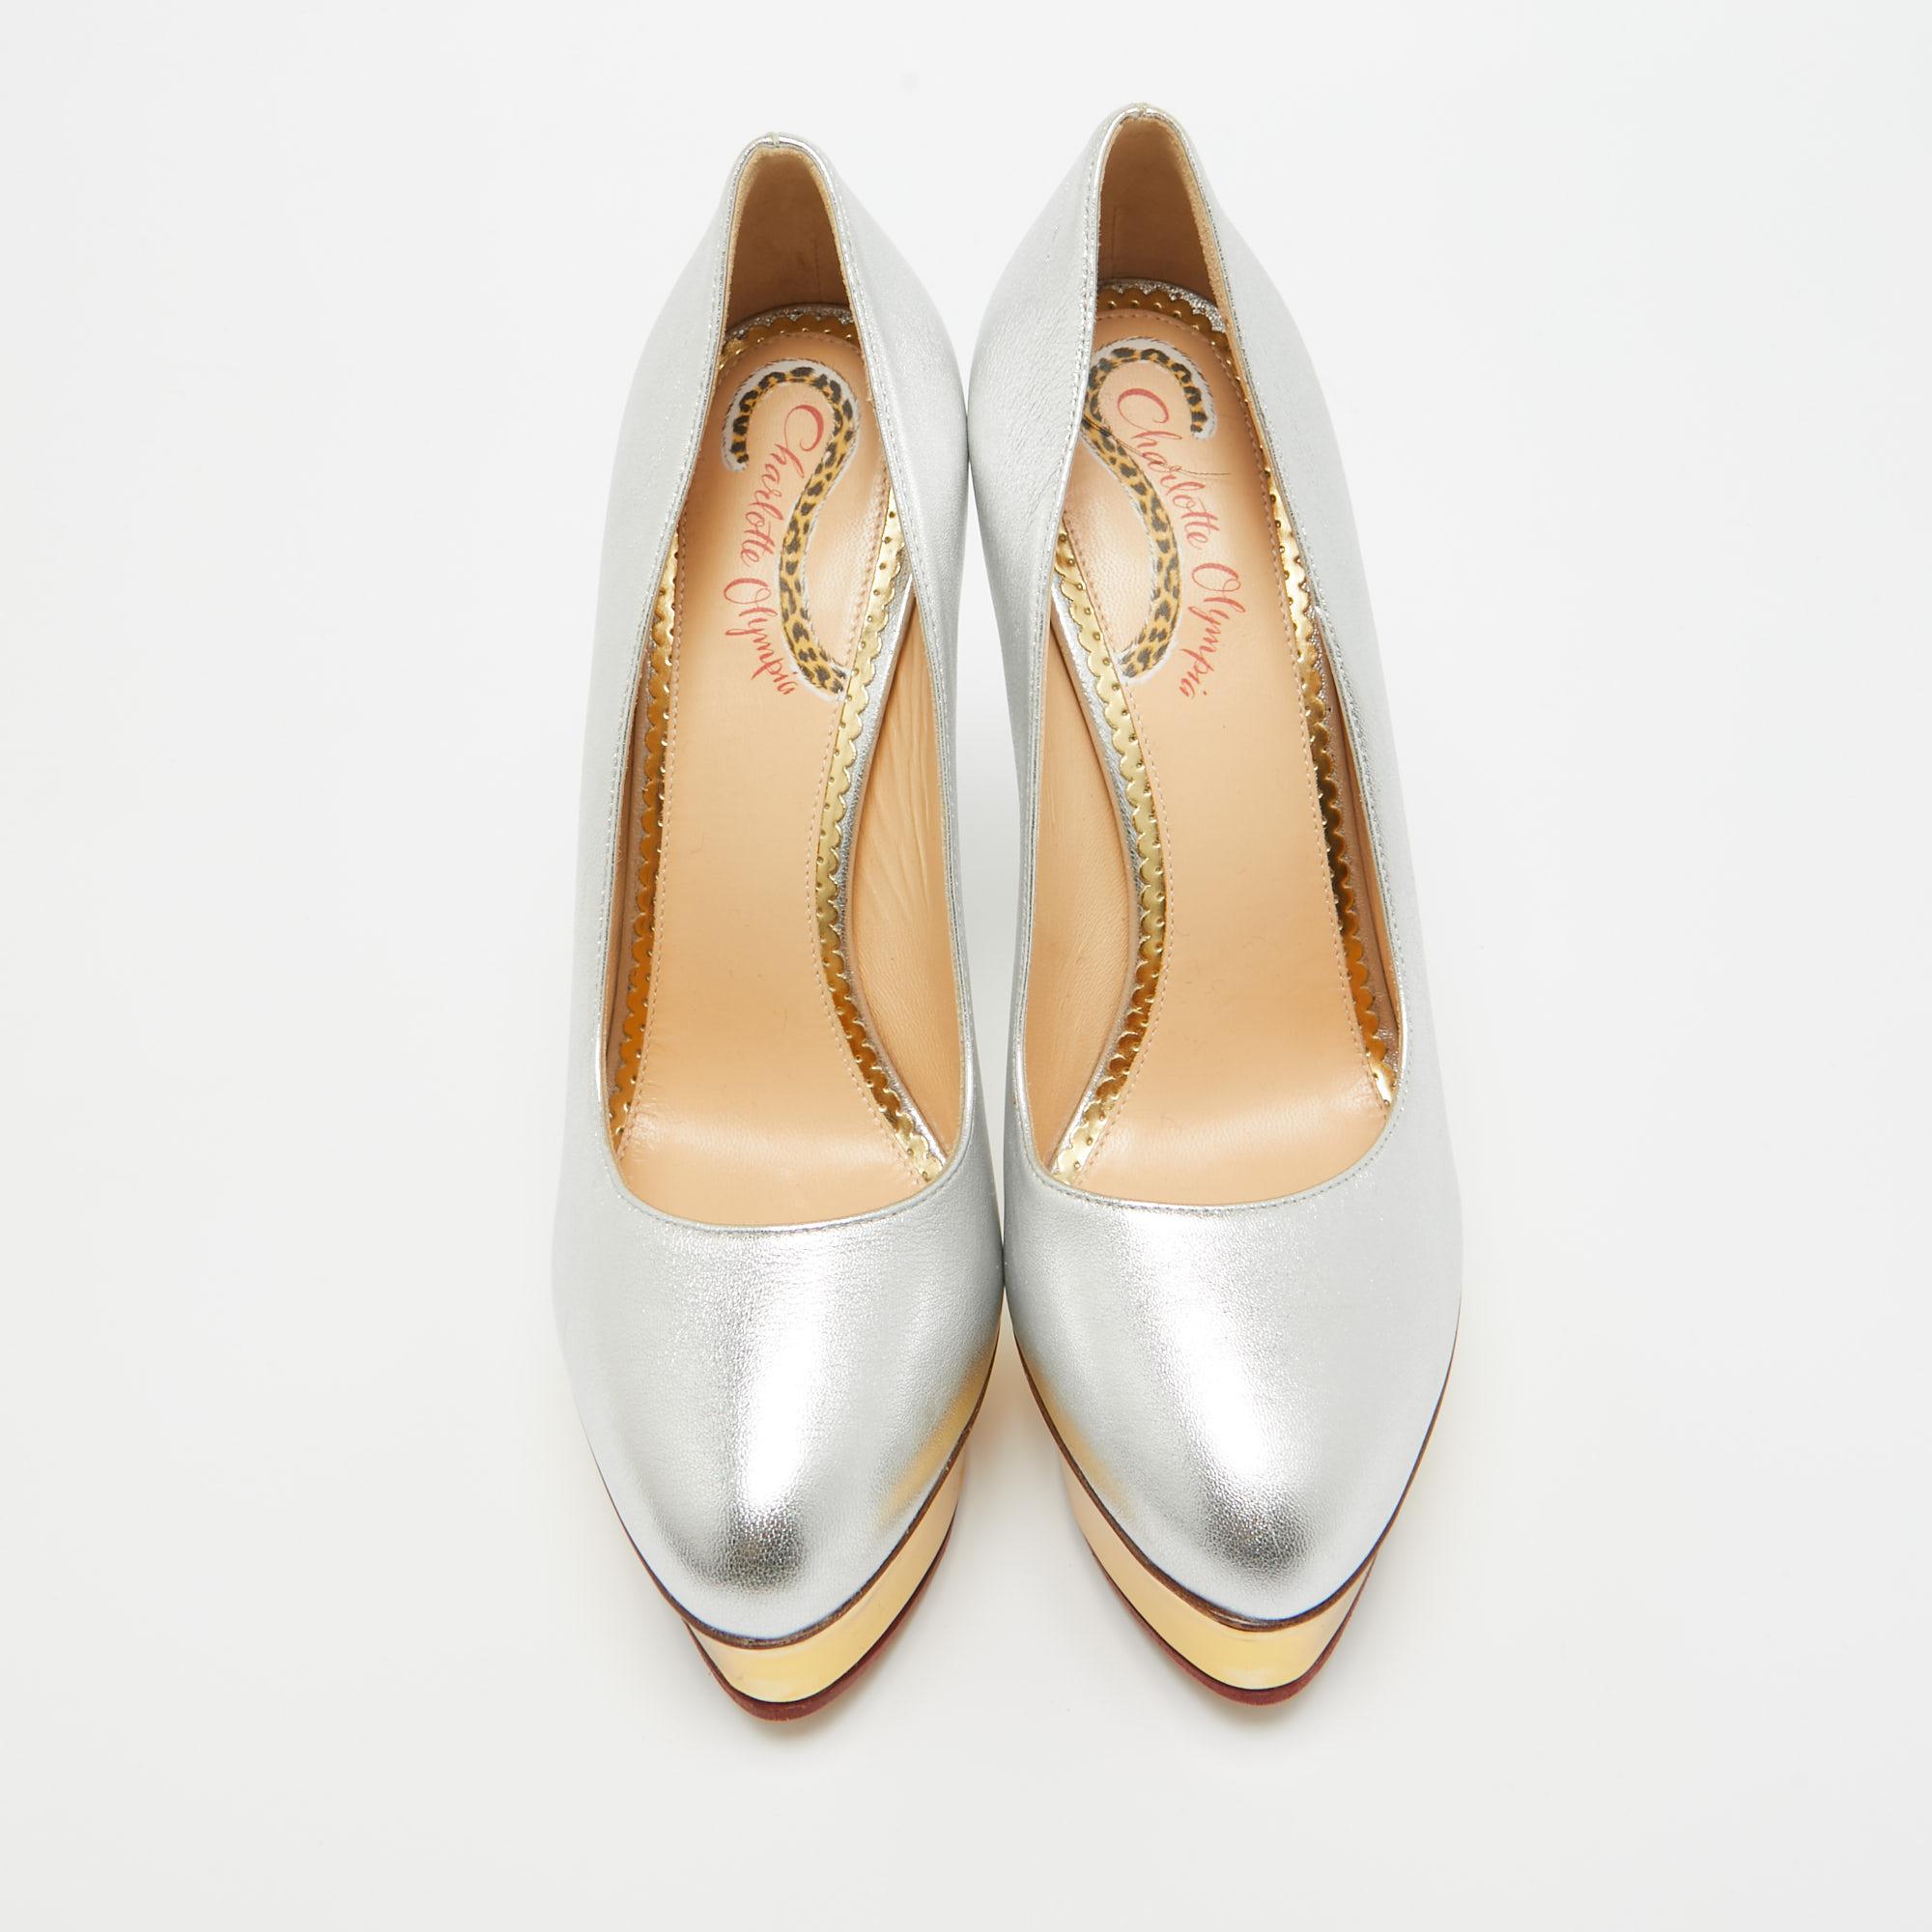 The fashion house’s tradition of excellence, coupled with modern design sensibilities, works to make these silver pumps a fabulous choice. They'll help you deliver a chic look with ease.

